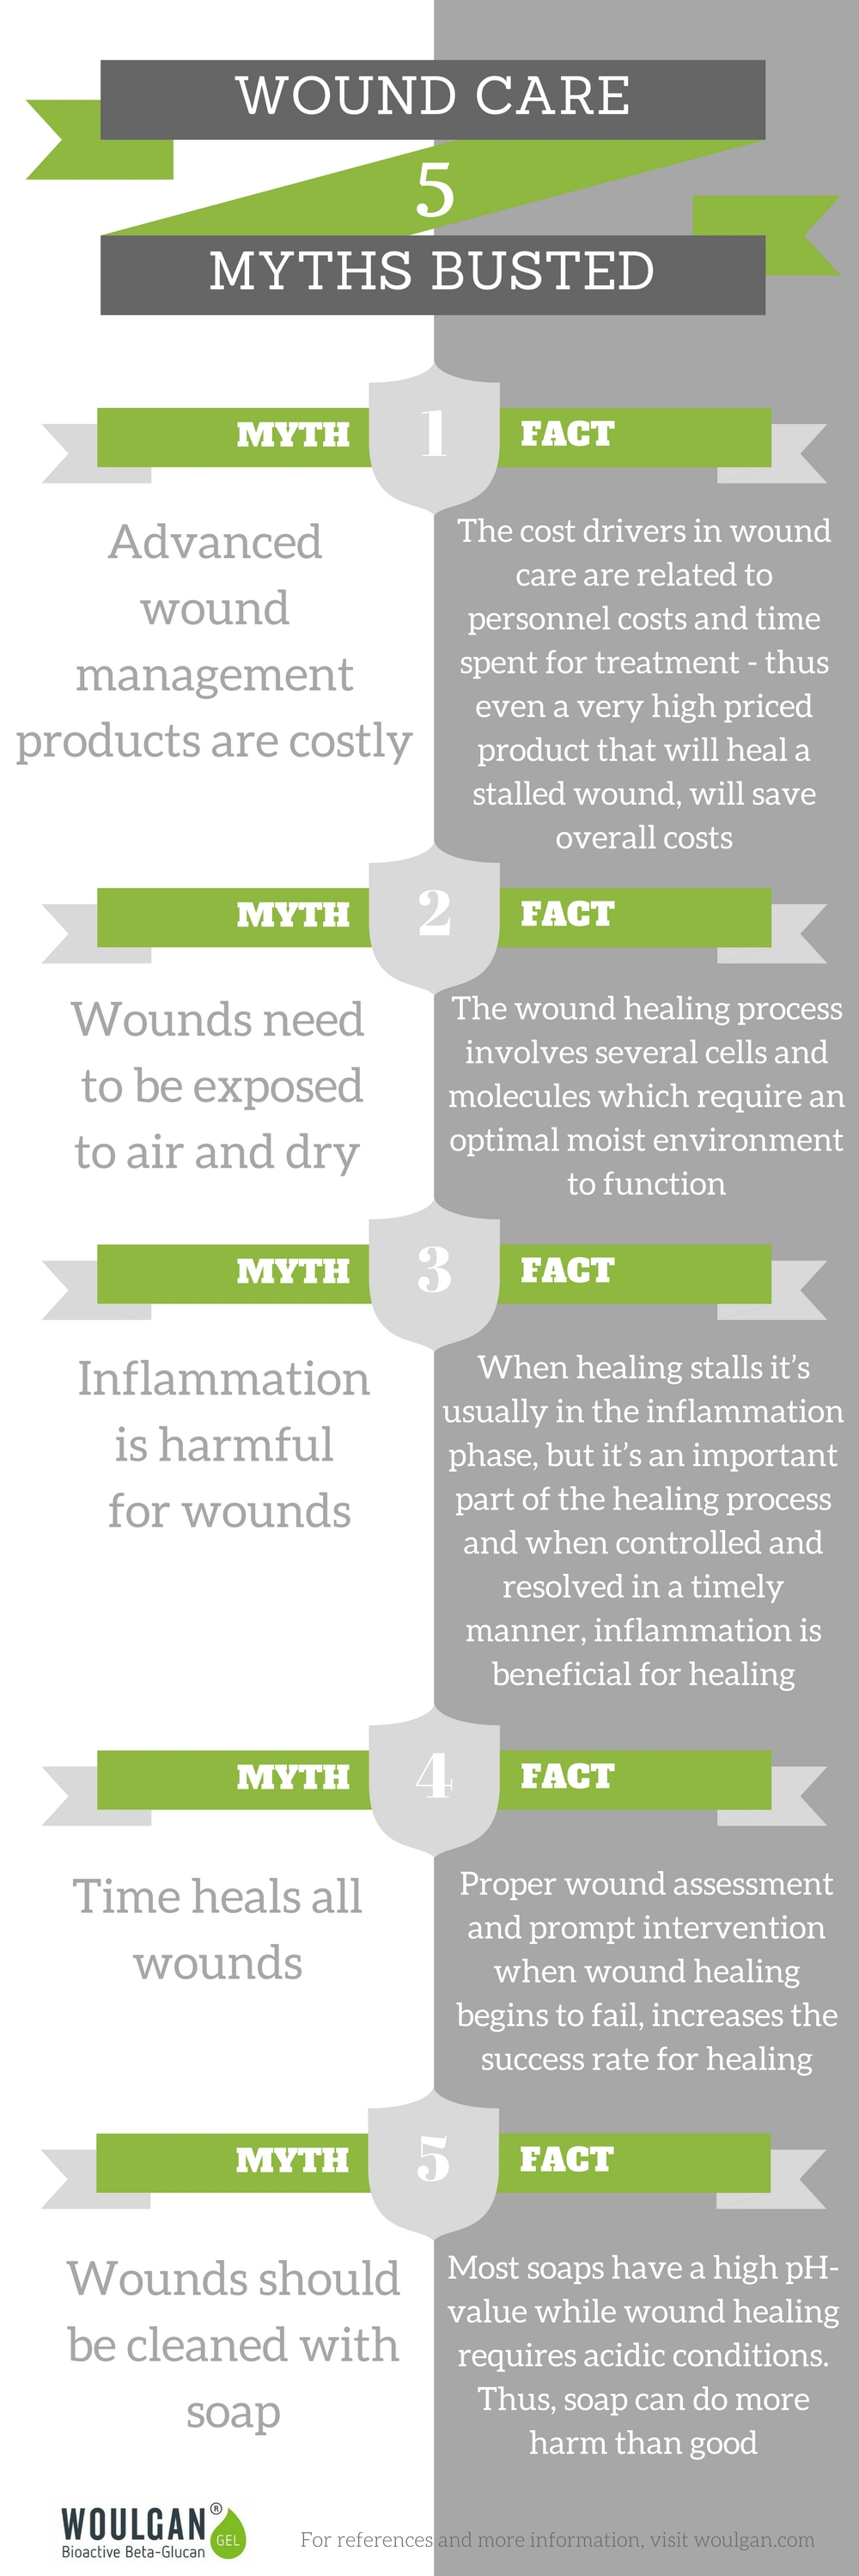 Common wound care myths busted